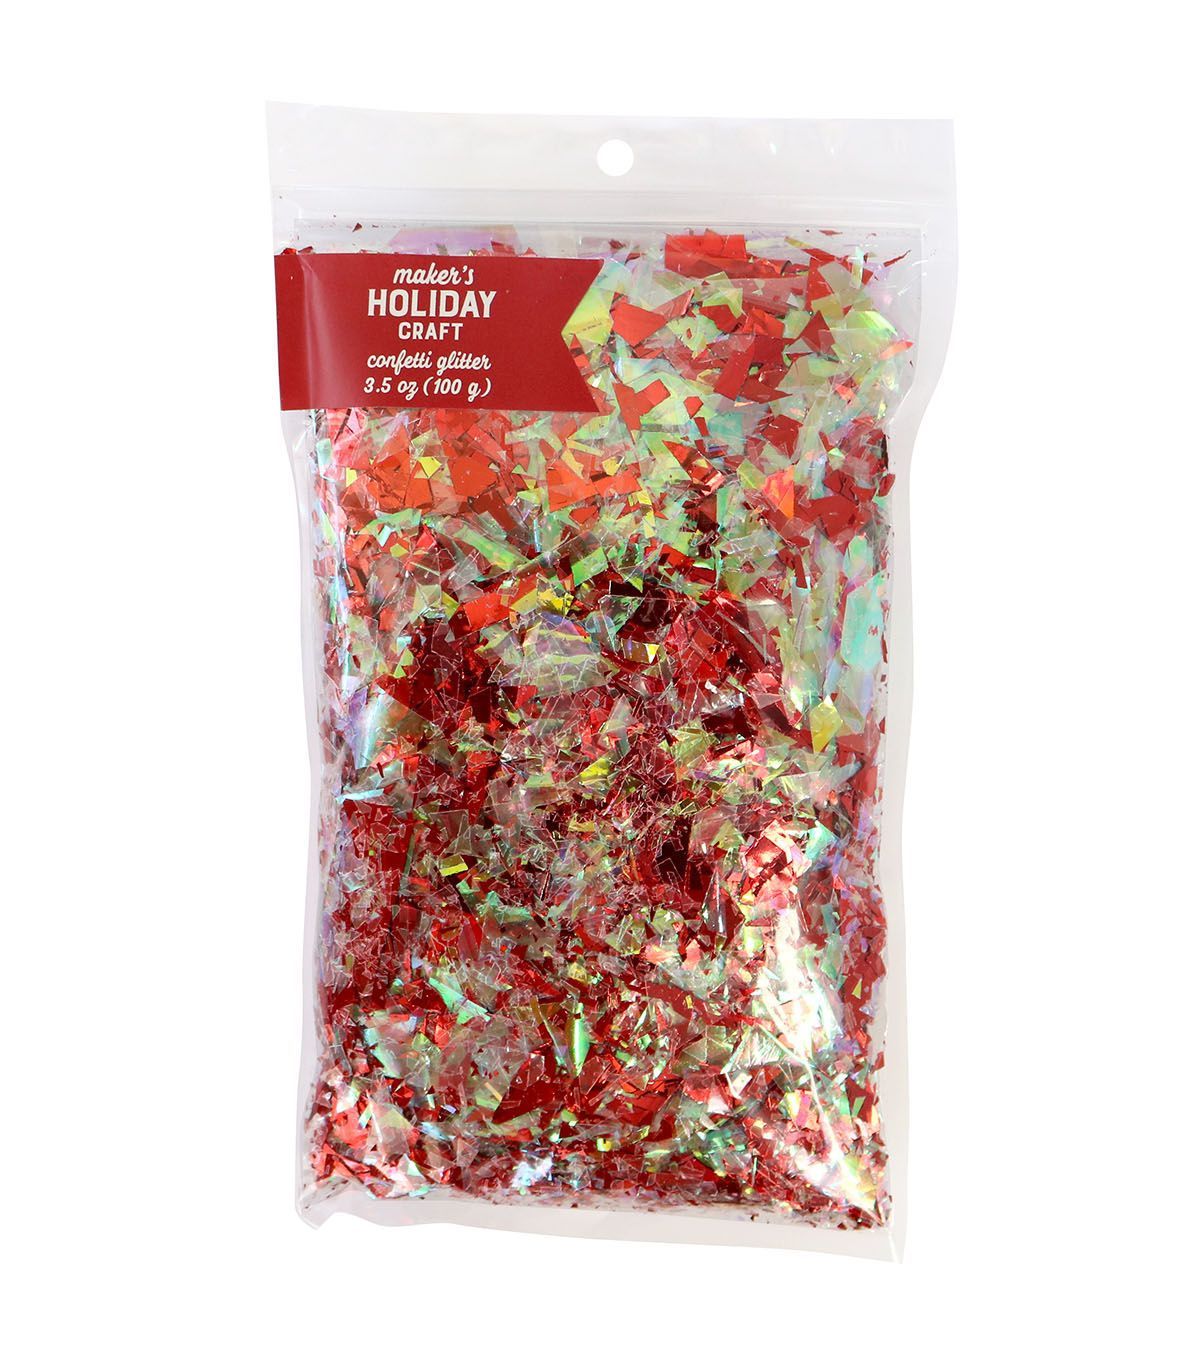 Maker's Holiday Craft 3.5oz Confetti Glitter - Red -   24 holiday crafts products
 ideas